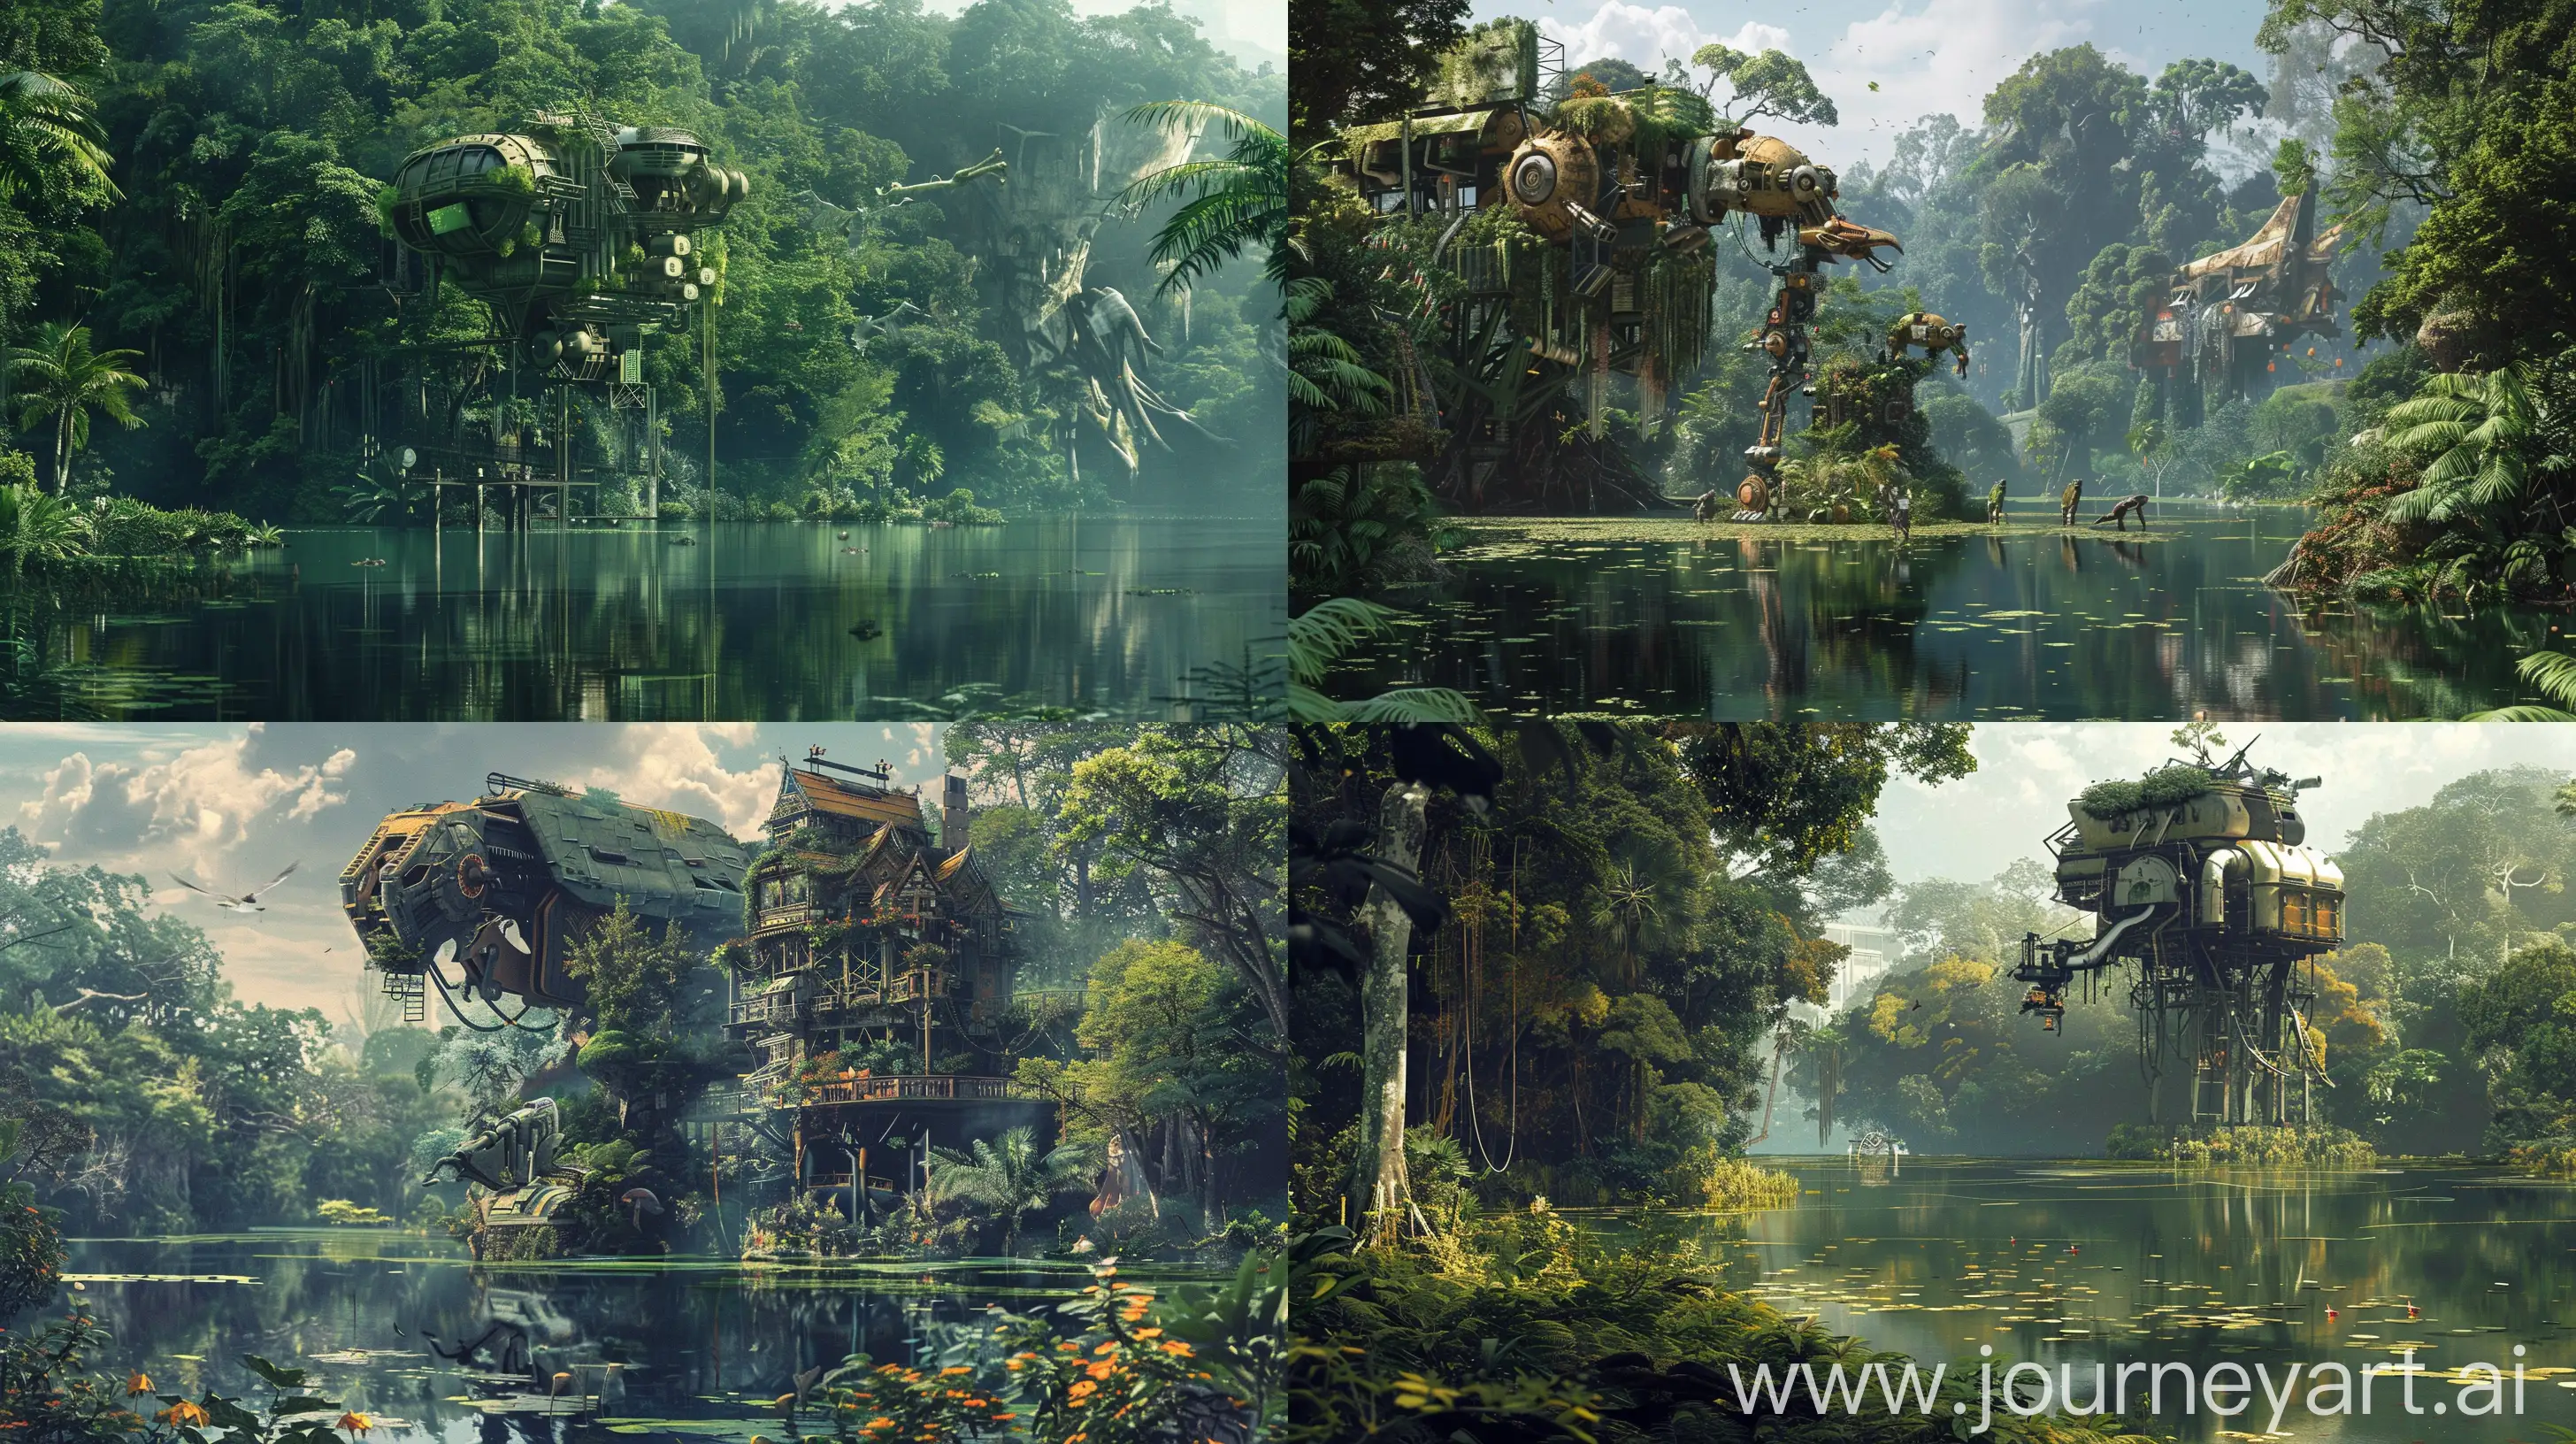 Surreal-Thai-Panel-House-Amidst-Natures-Mysteries